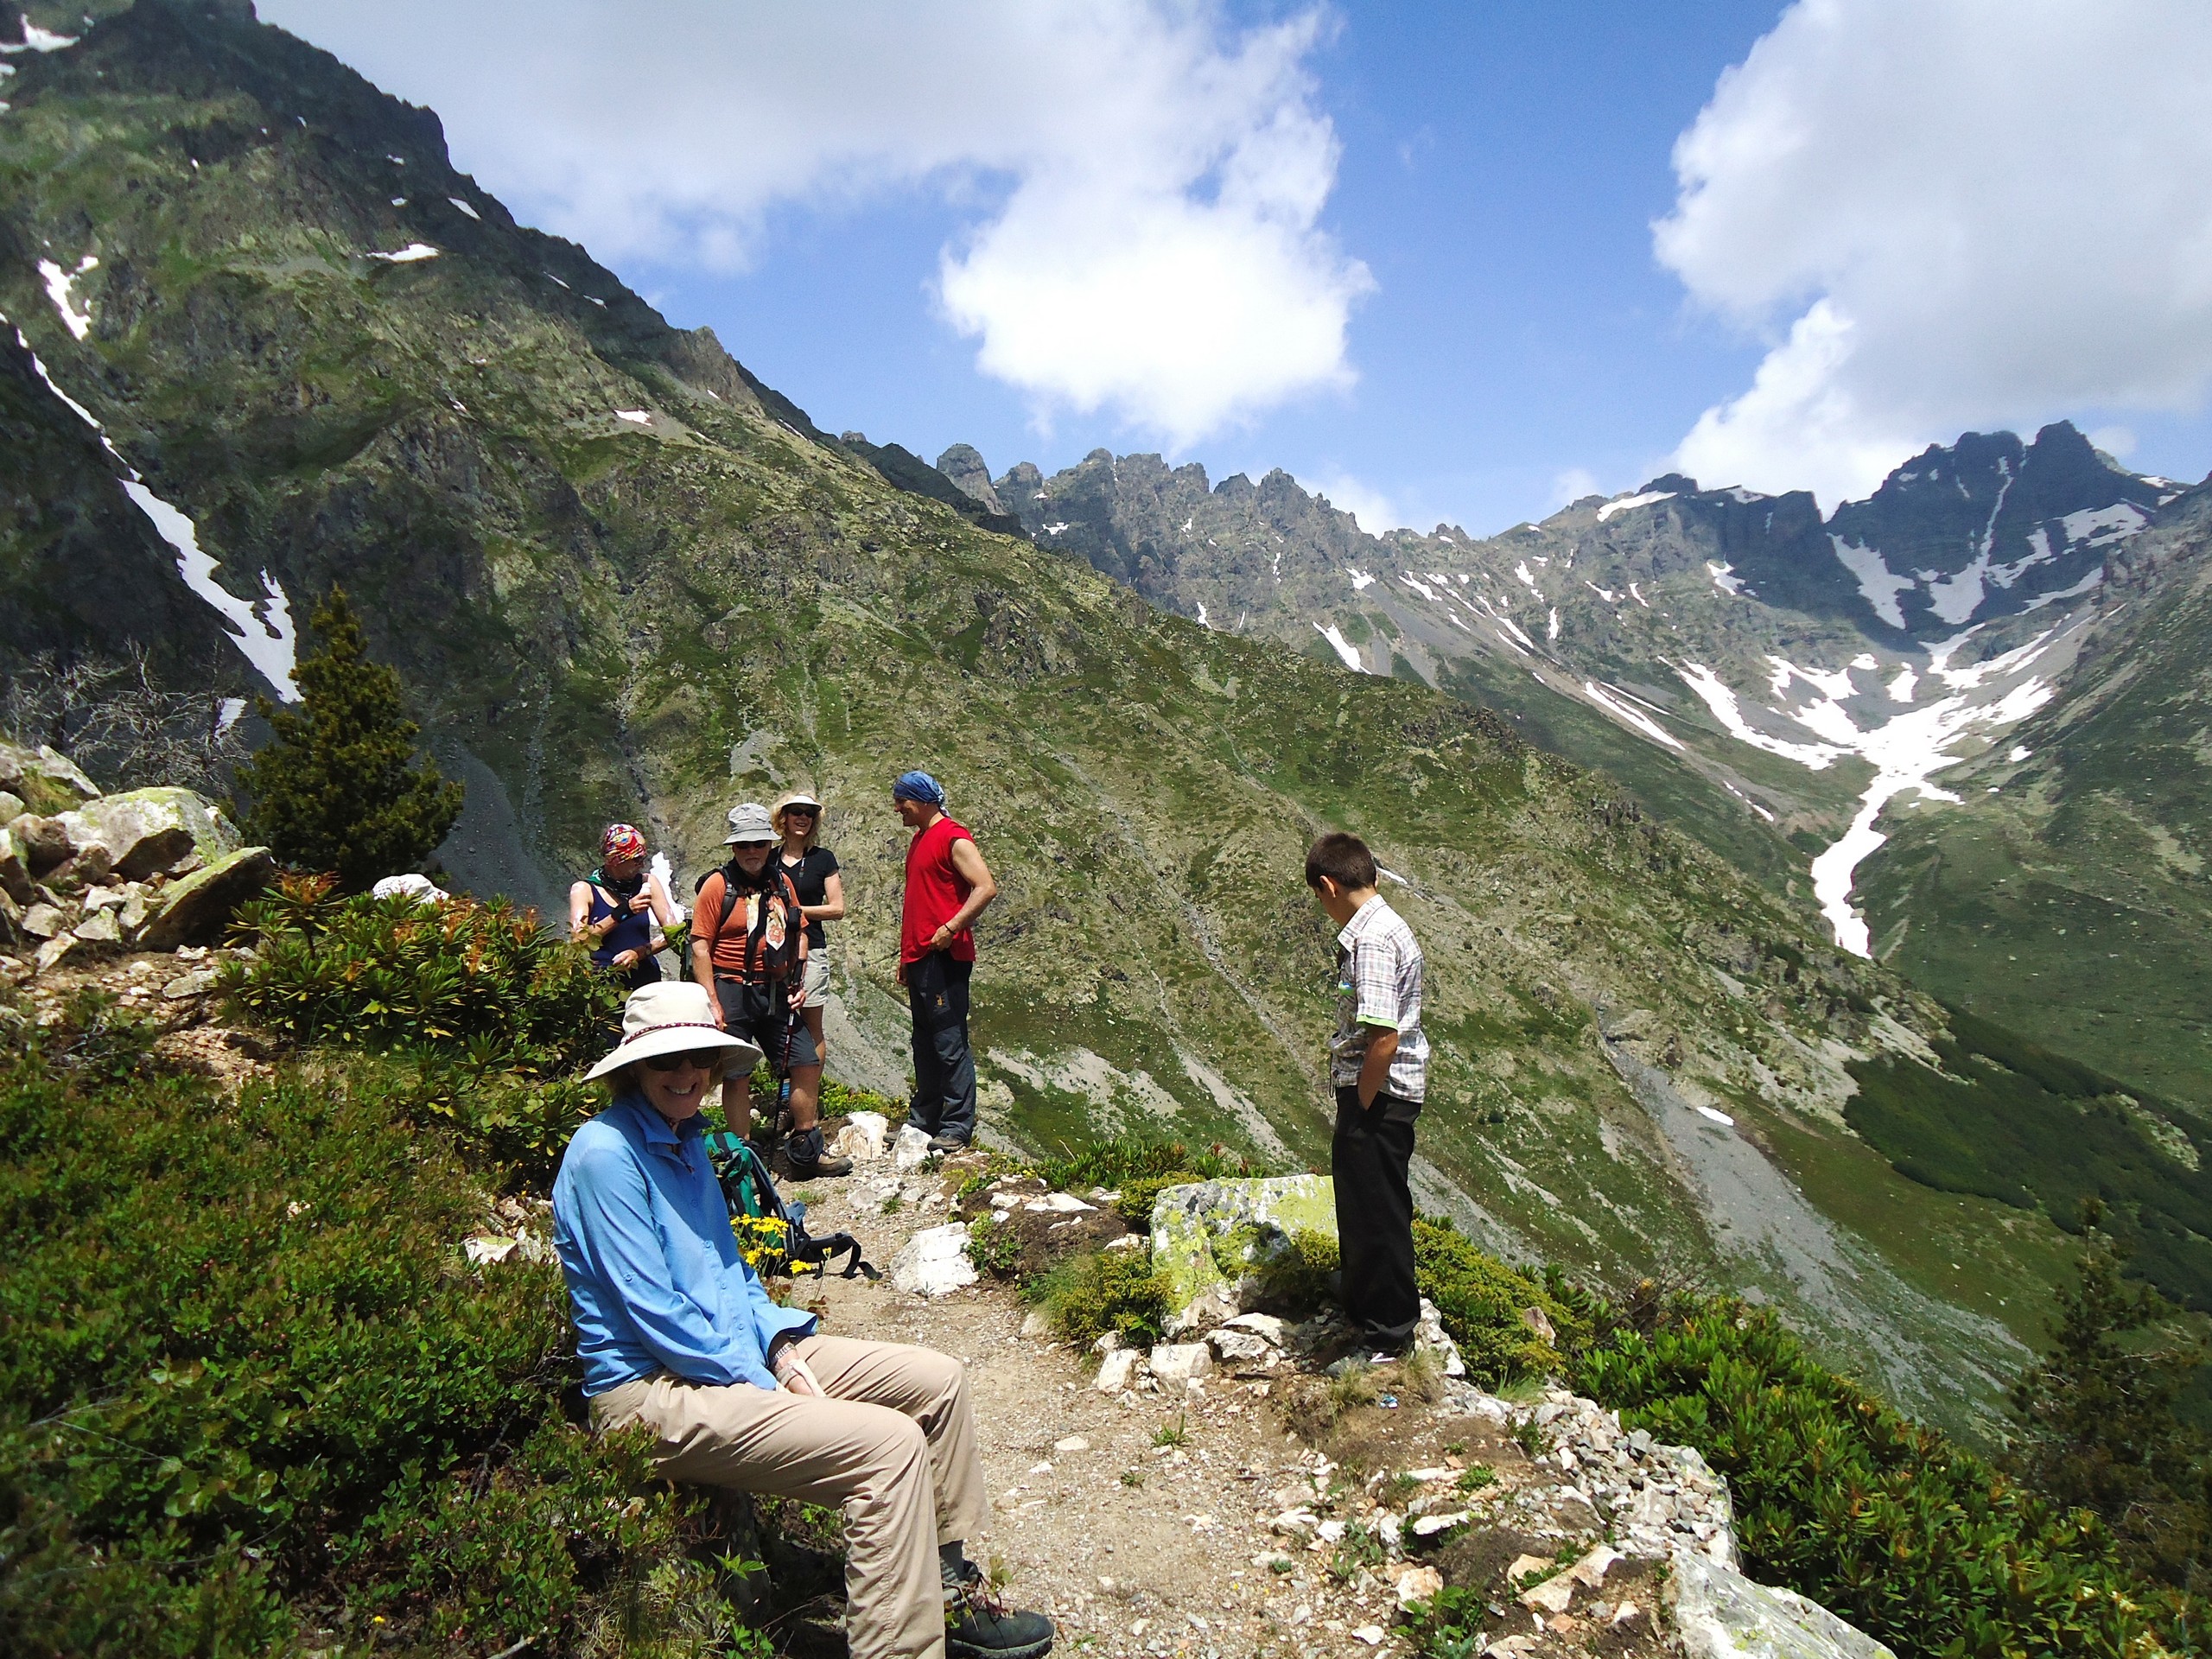 Group of hikers resting while on trek to Kackar summit